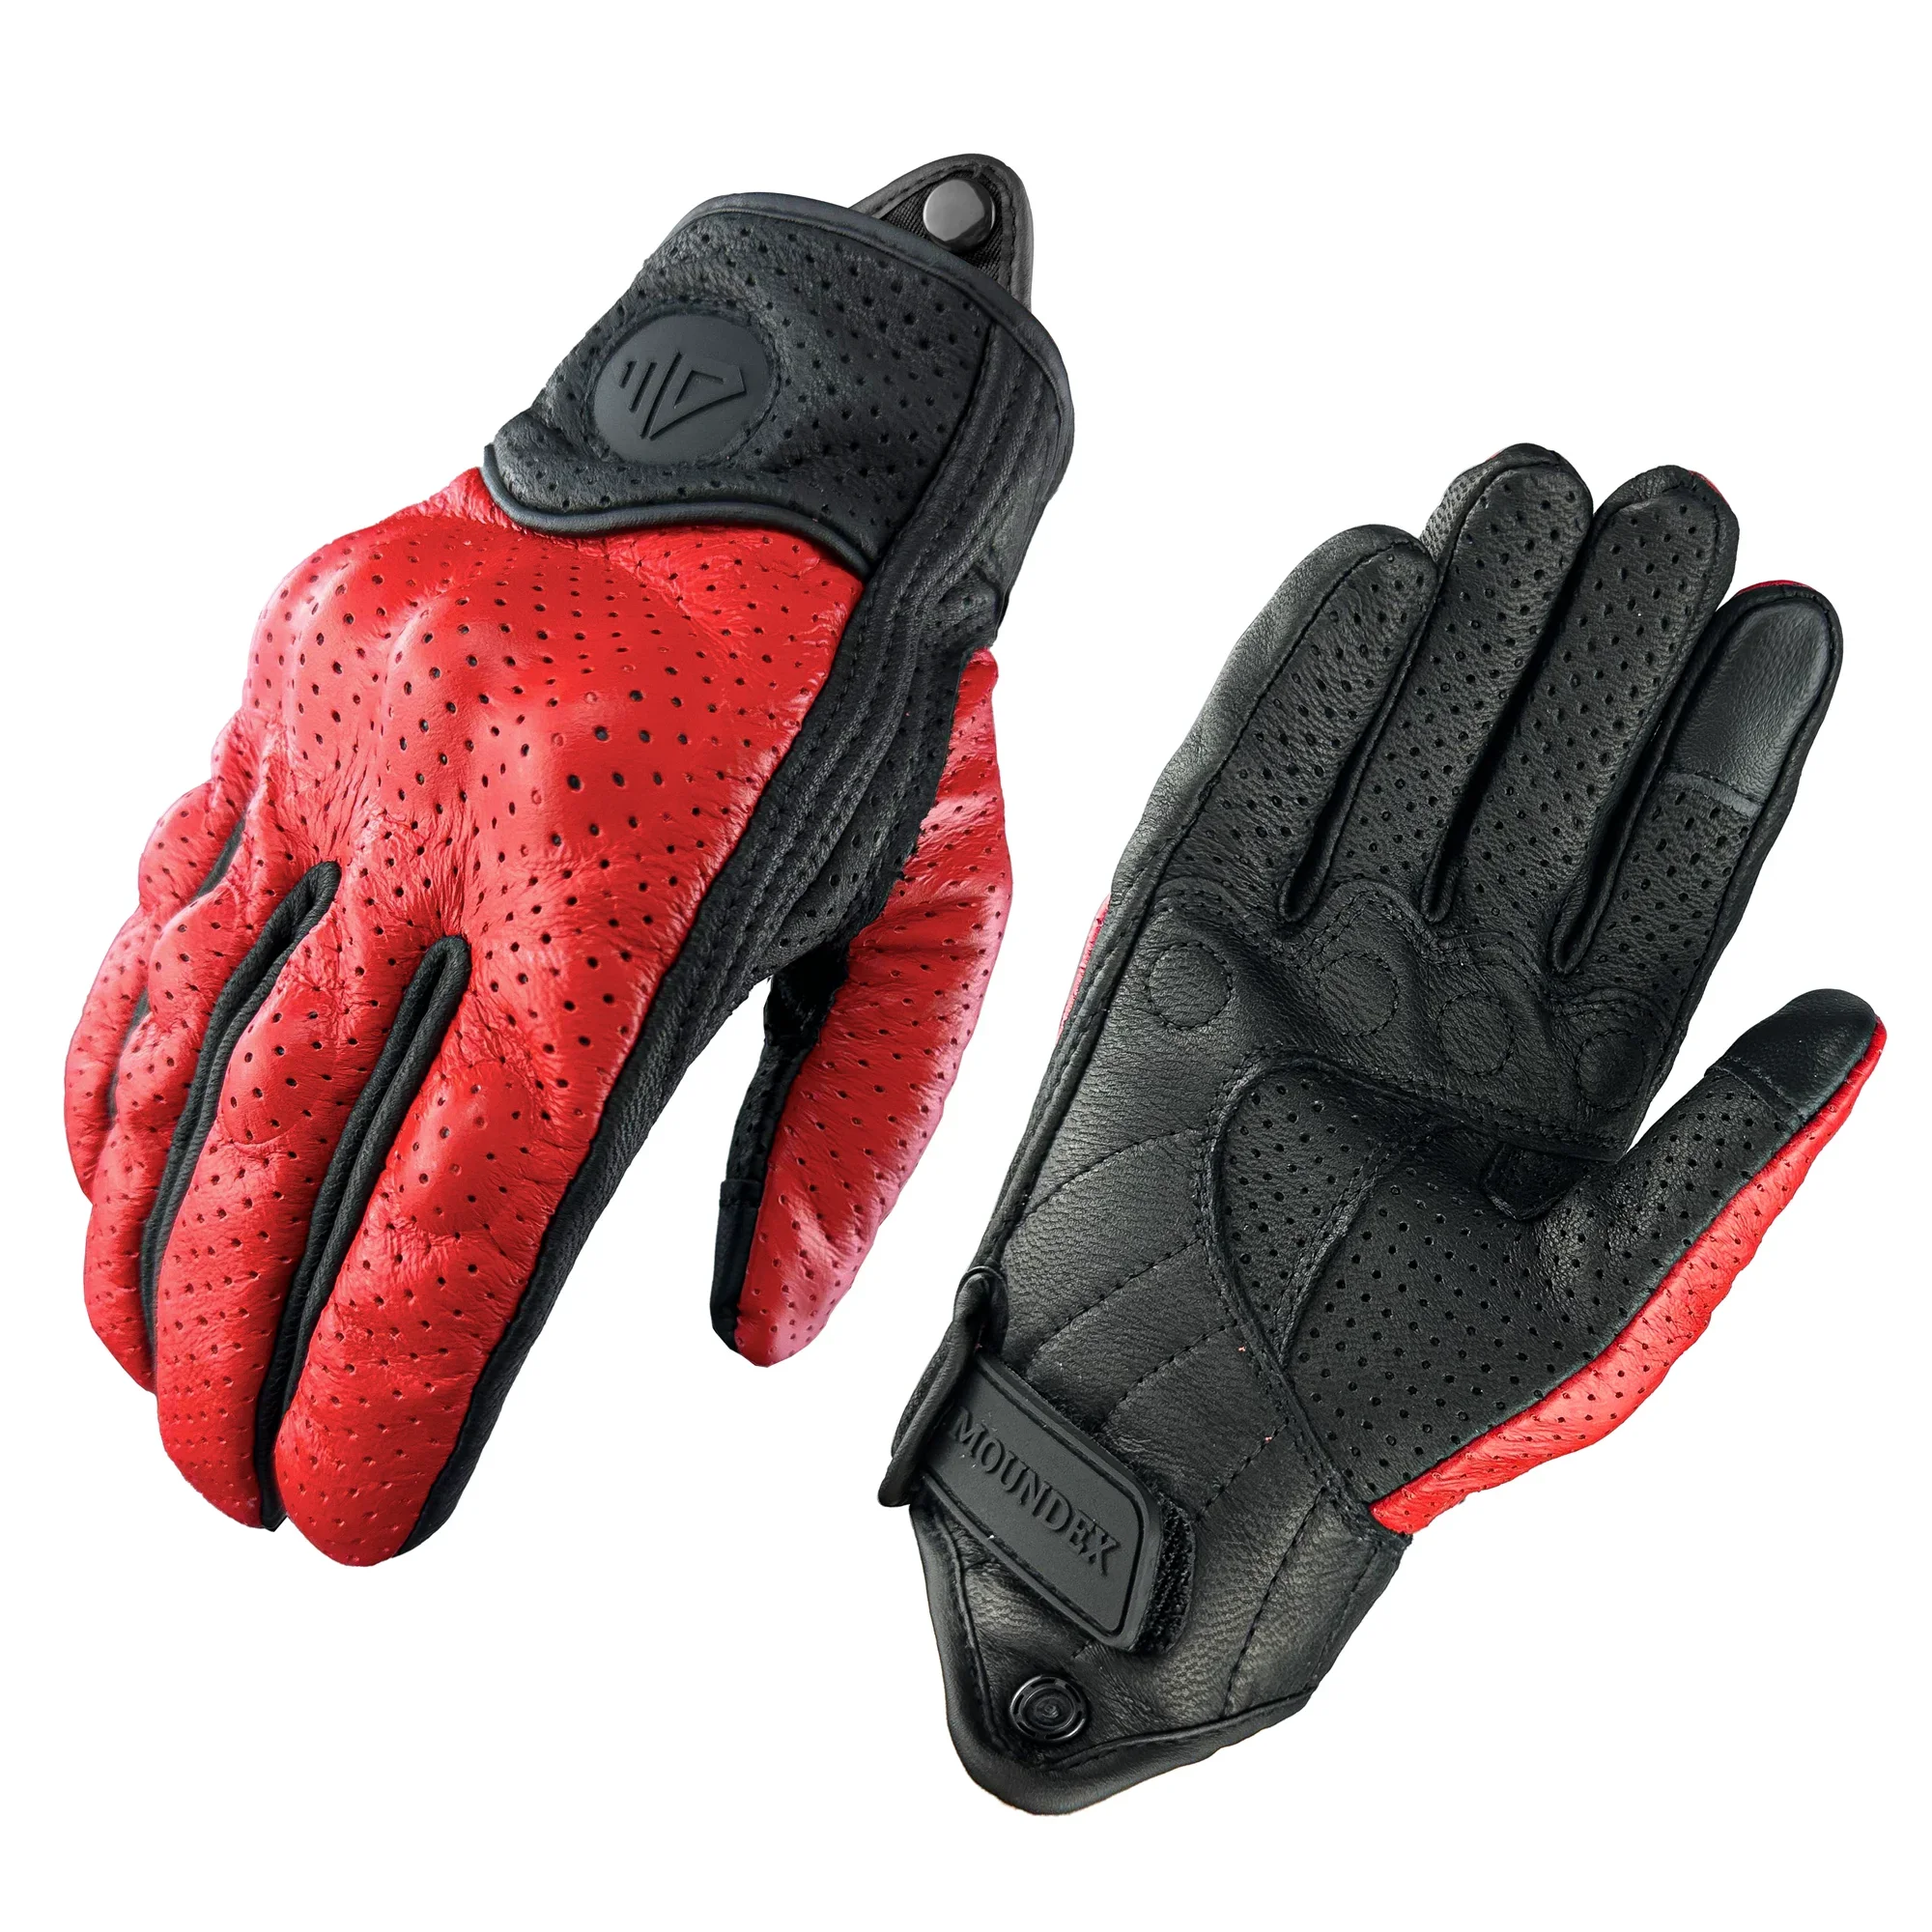 

Moto Glove Touch Screen Motorcycle Gloves Breathable Motorbike Ride Protective Guantes Moto Full Fingers Motocross Driving Kn